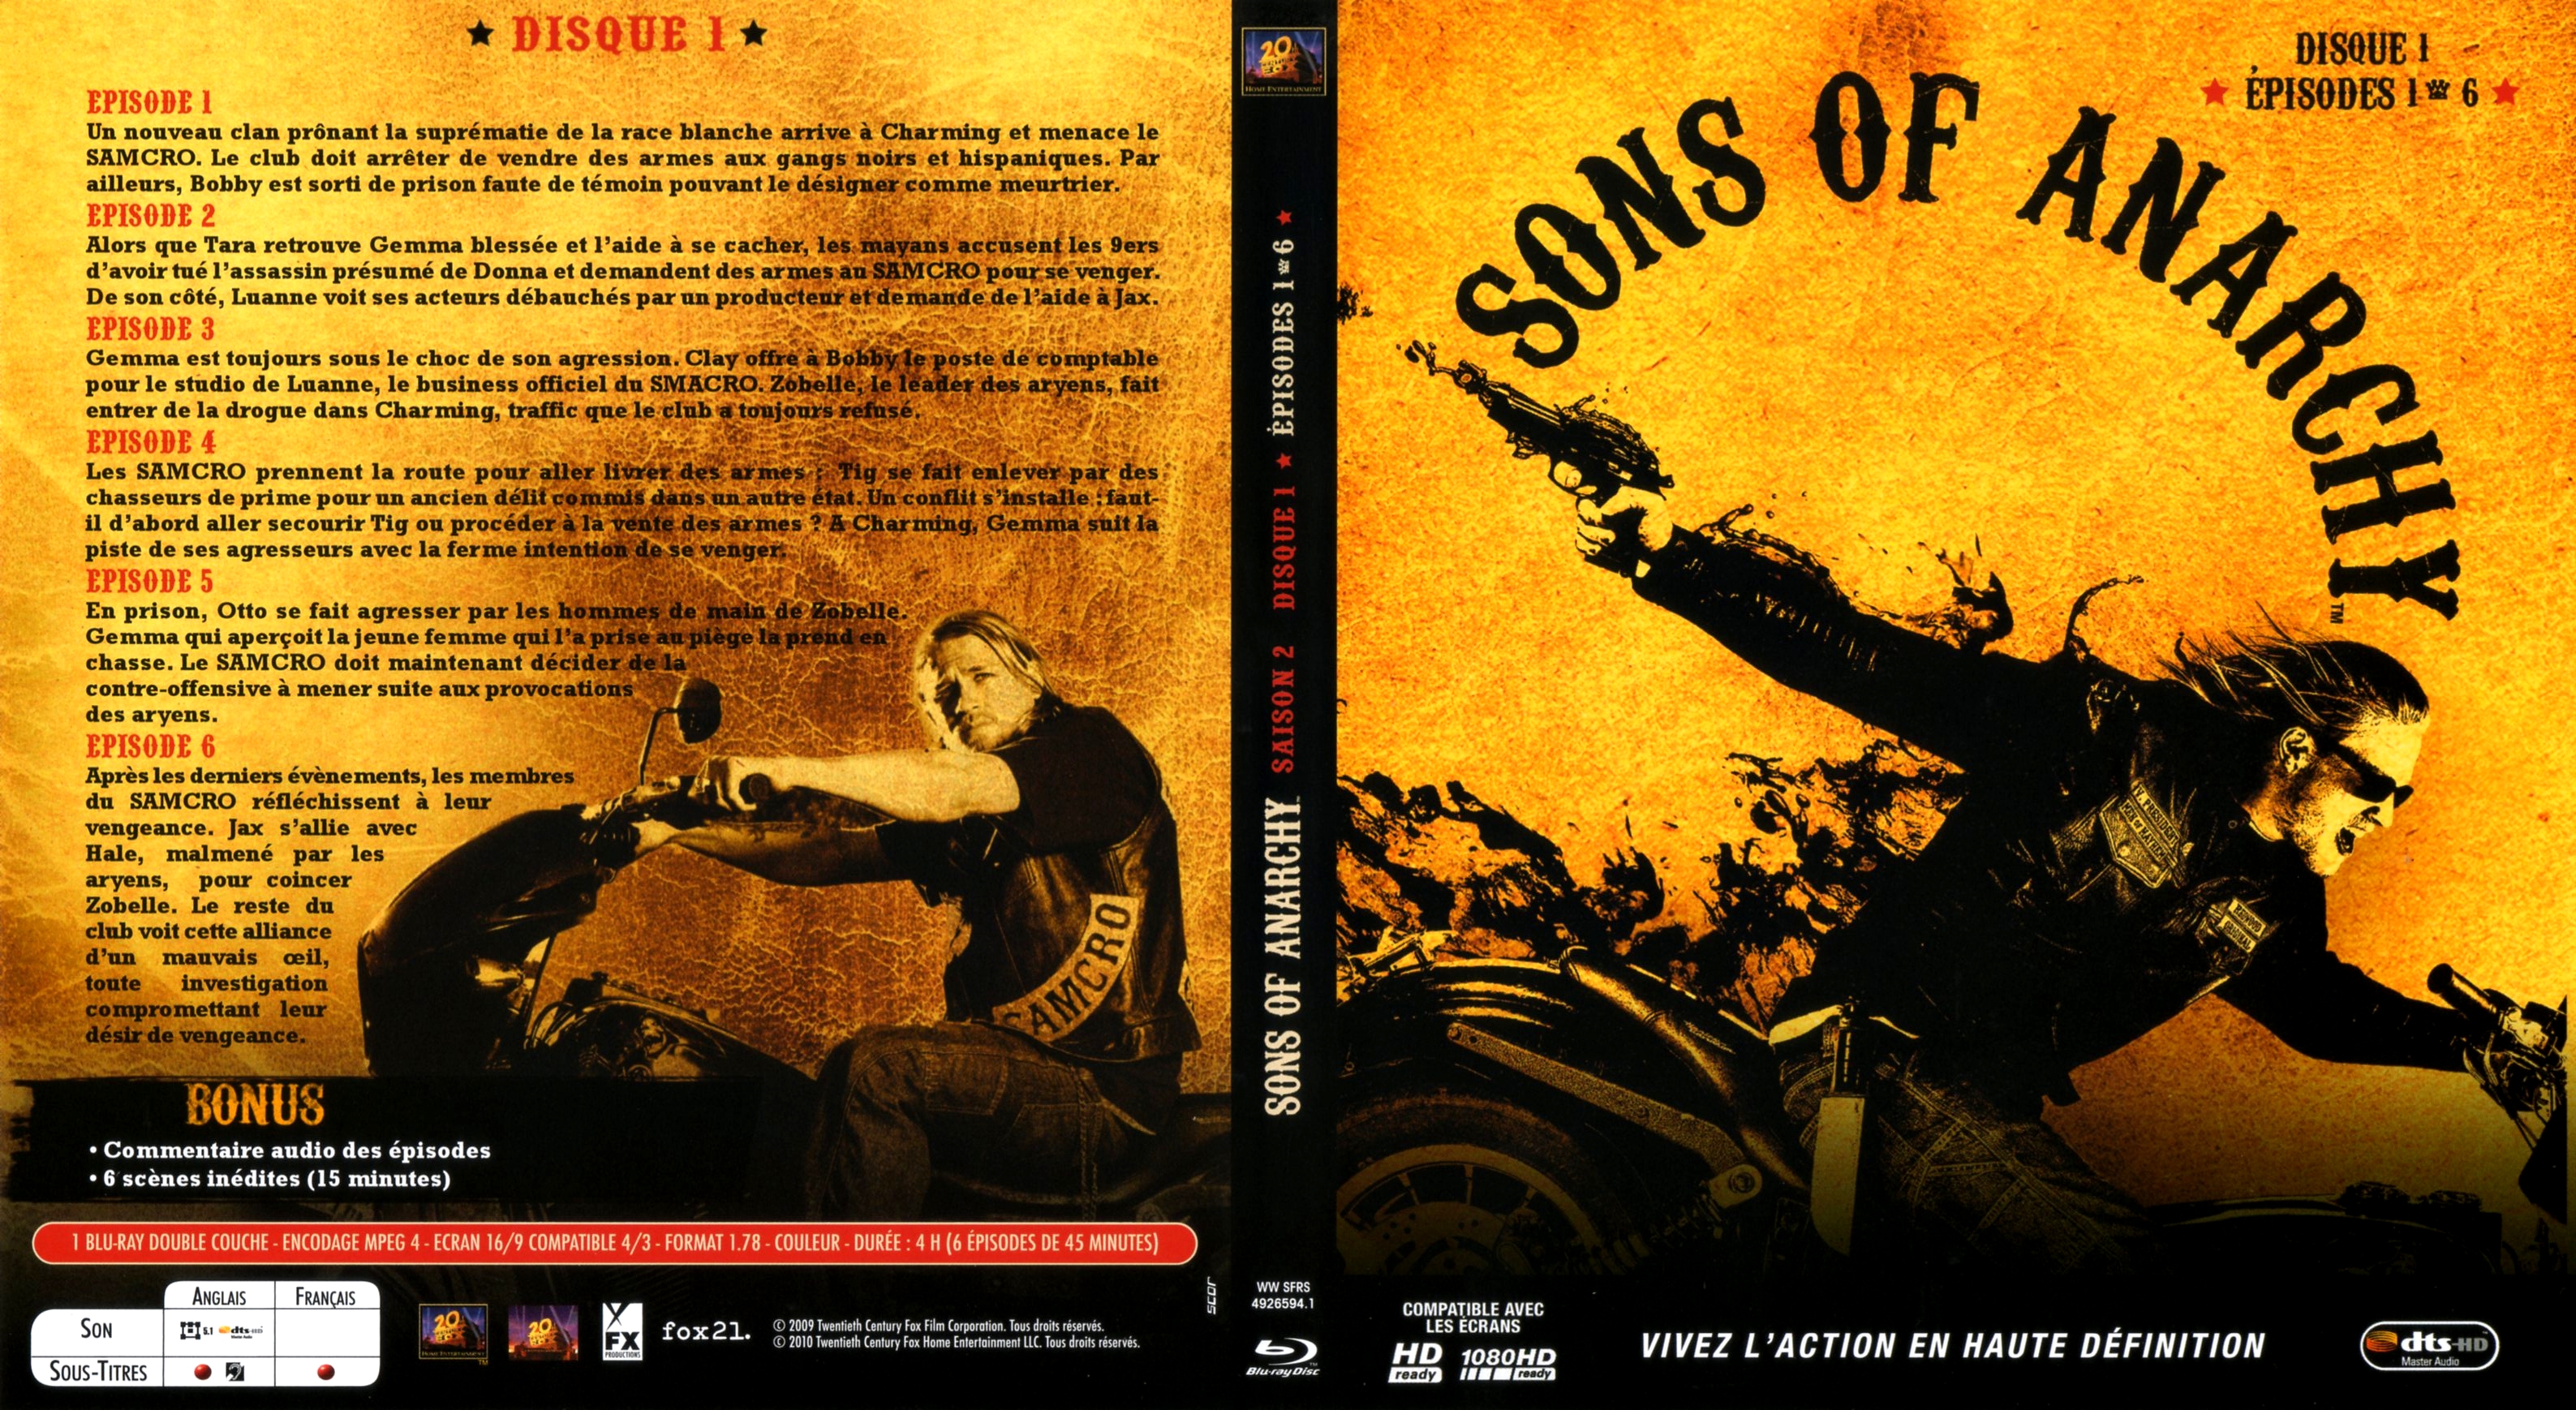 Jaquette DVD Sons of anarchy Saison 2 DISC 1 (BLU-RAY)